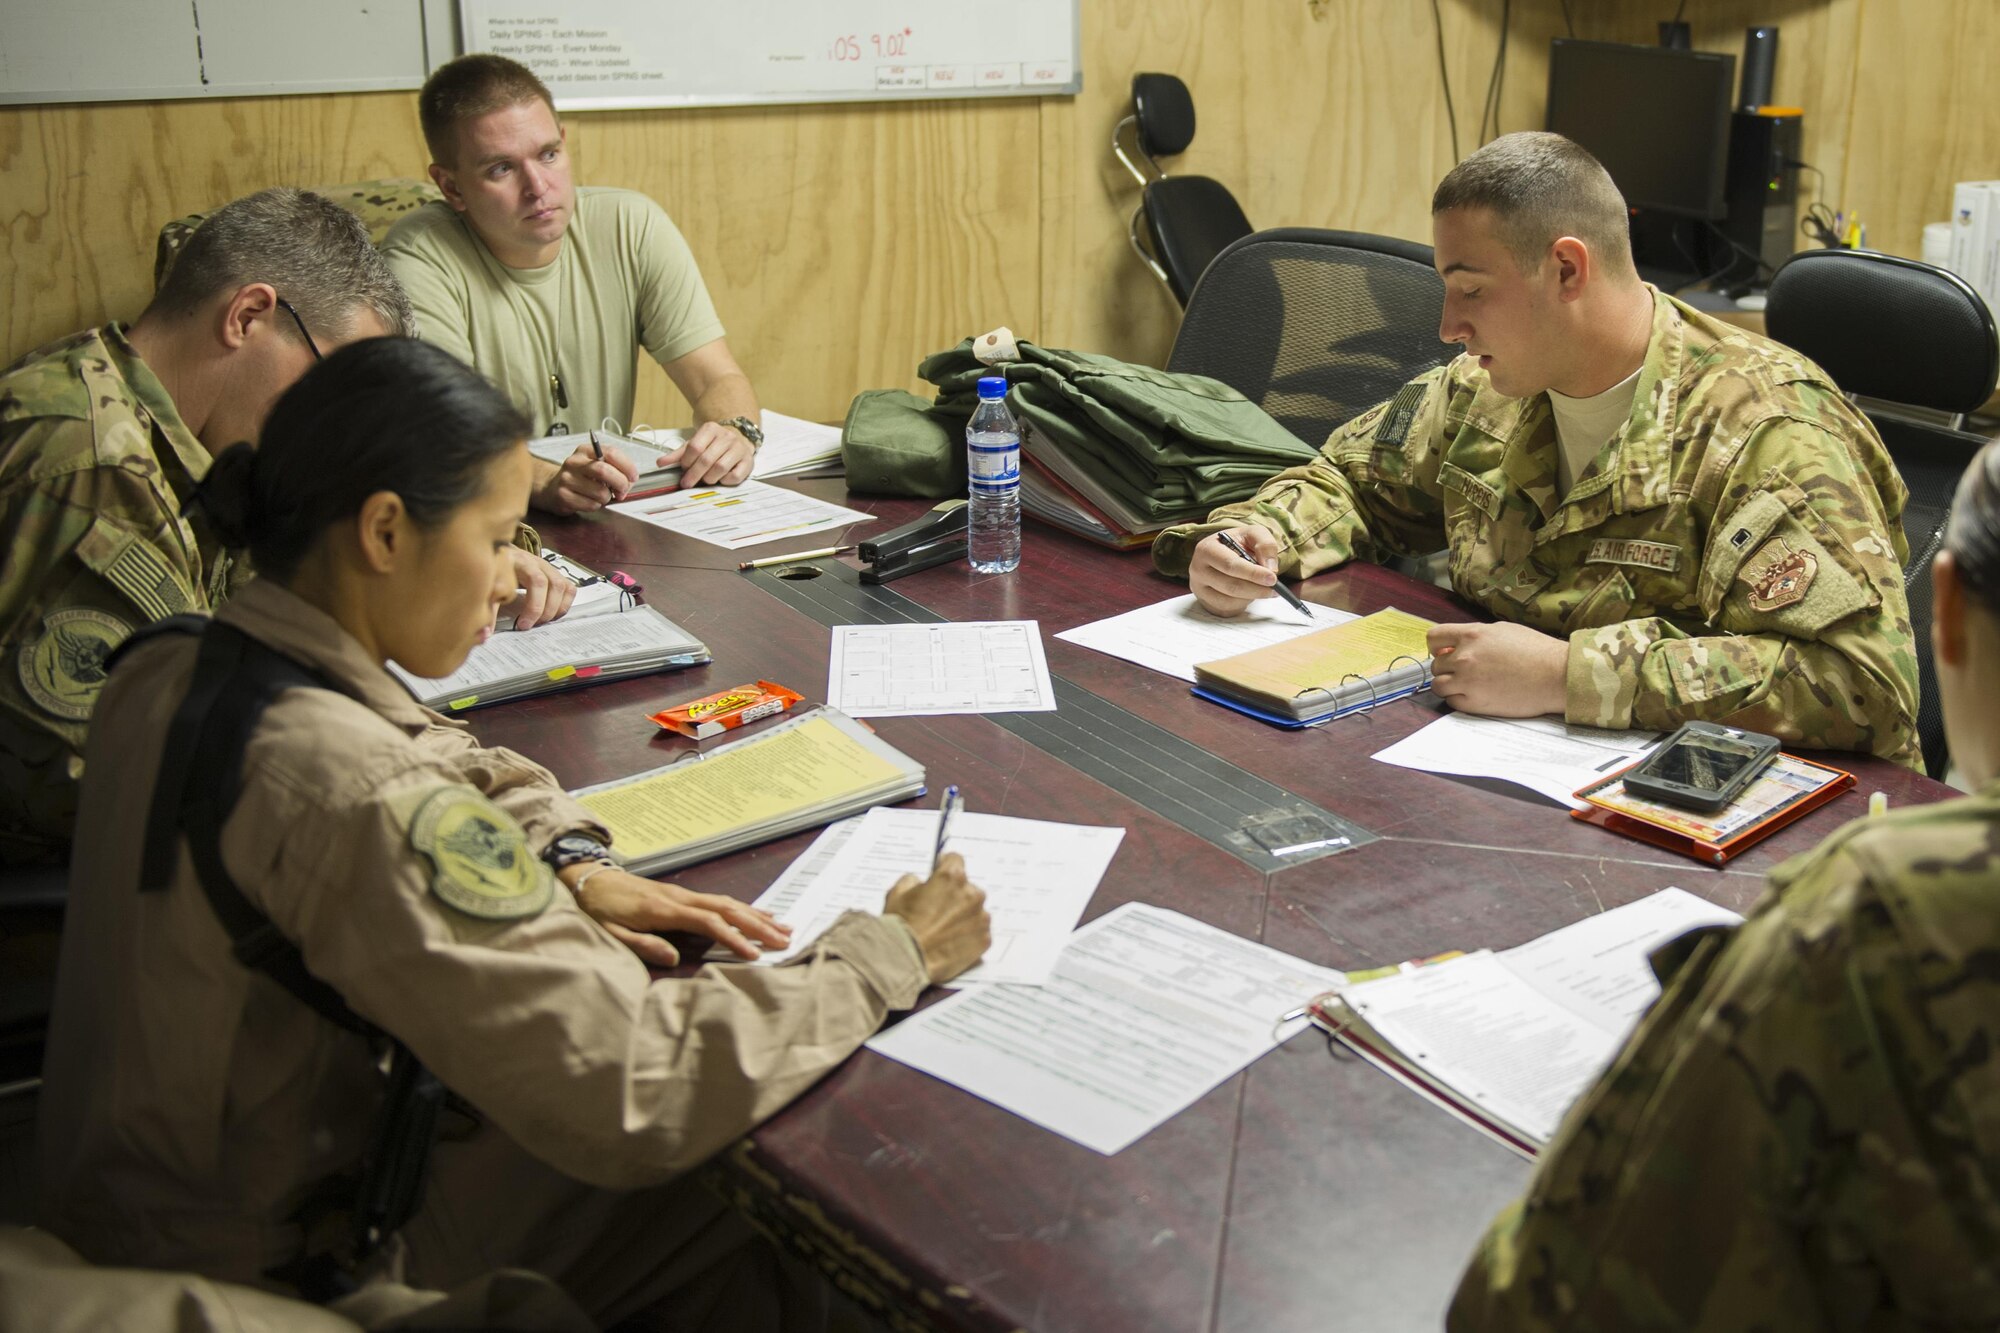 Senior Airman Justin Harris (right), 455th Expeditionary Aeromedical Evacuation Squadron medical technician, deployed from the 167th AES at Charleston Air National Guard Base, W.Va., gives a charge medical technician brief prior to departing for an alert mission at Bagram Airfield, Afghanistan, Nov. 6, 2015. The briefing ensures the AE team understands their roles when setting up medical equipment and ensures safety on the aircraft. (U.S. Air Force photo by Tech. Sgt. Robert Cloys/RELEASED)